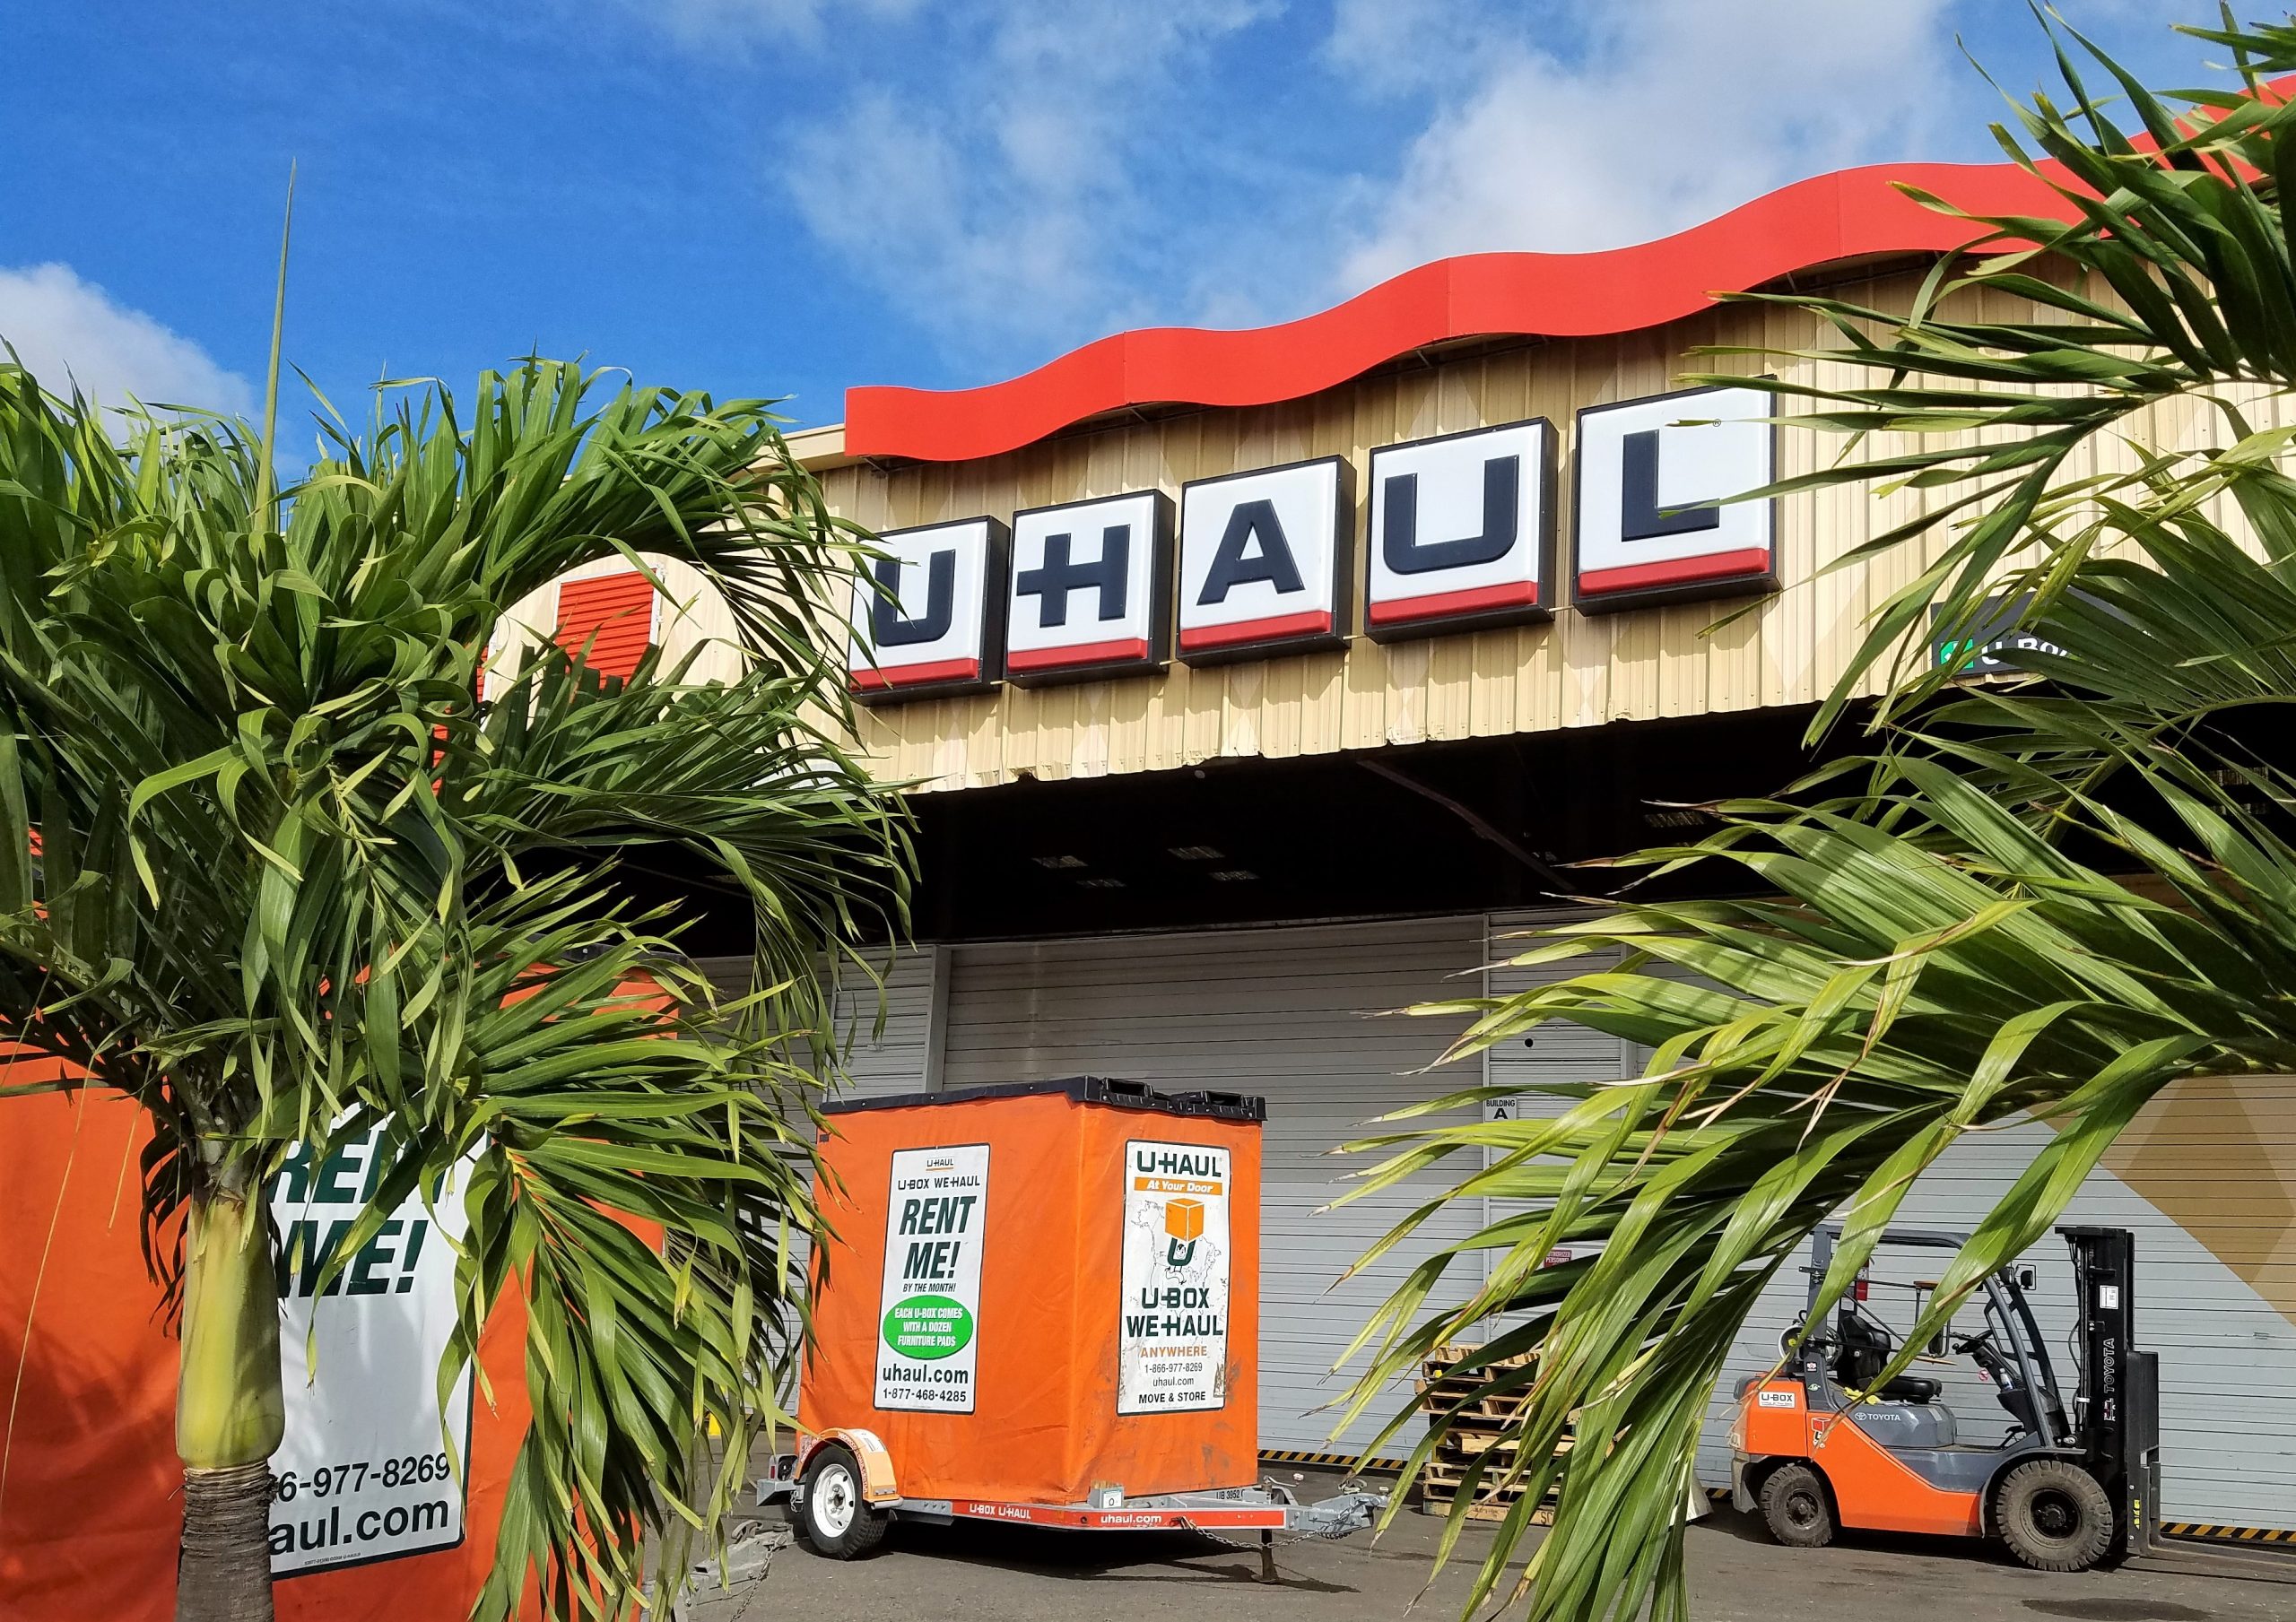 Maui Wildfires: U-Haul Offers 30 Days Free Self-Storage to Victims